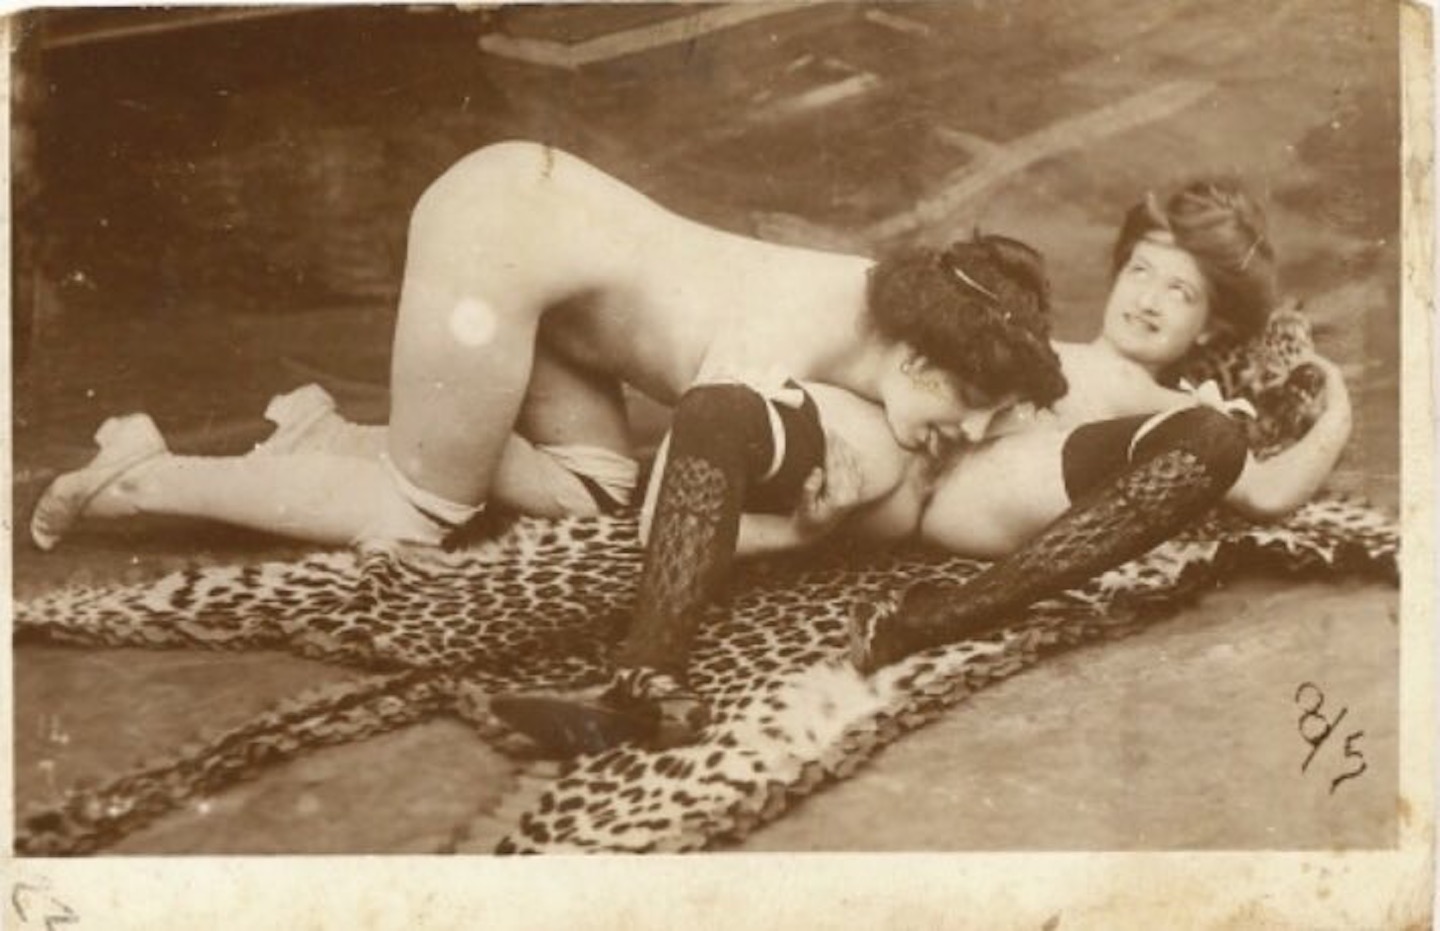 Furry Group Oral Sex - The Unbridled Joy of Victorian Porn - VICE